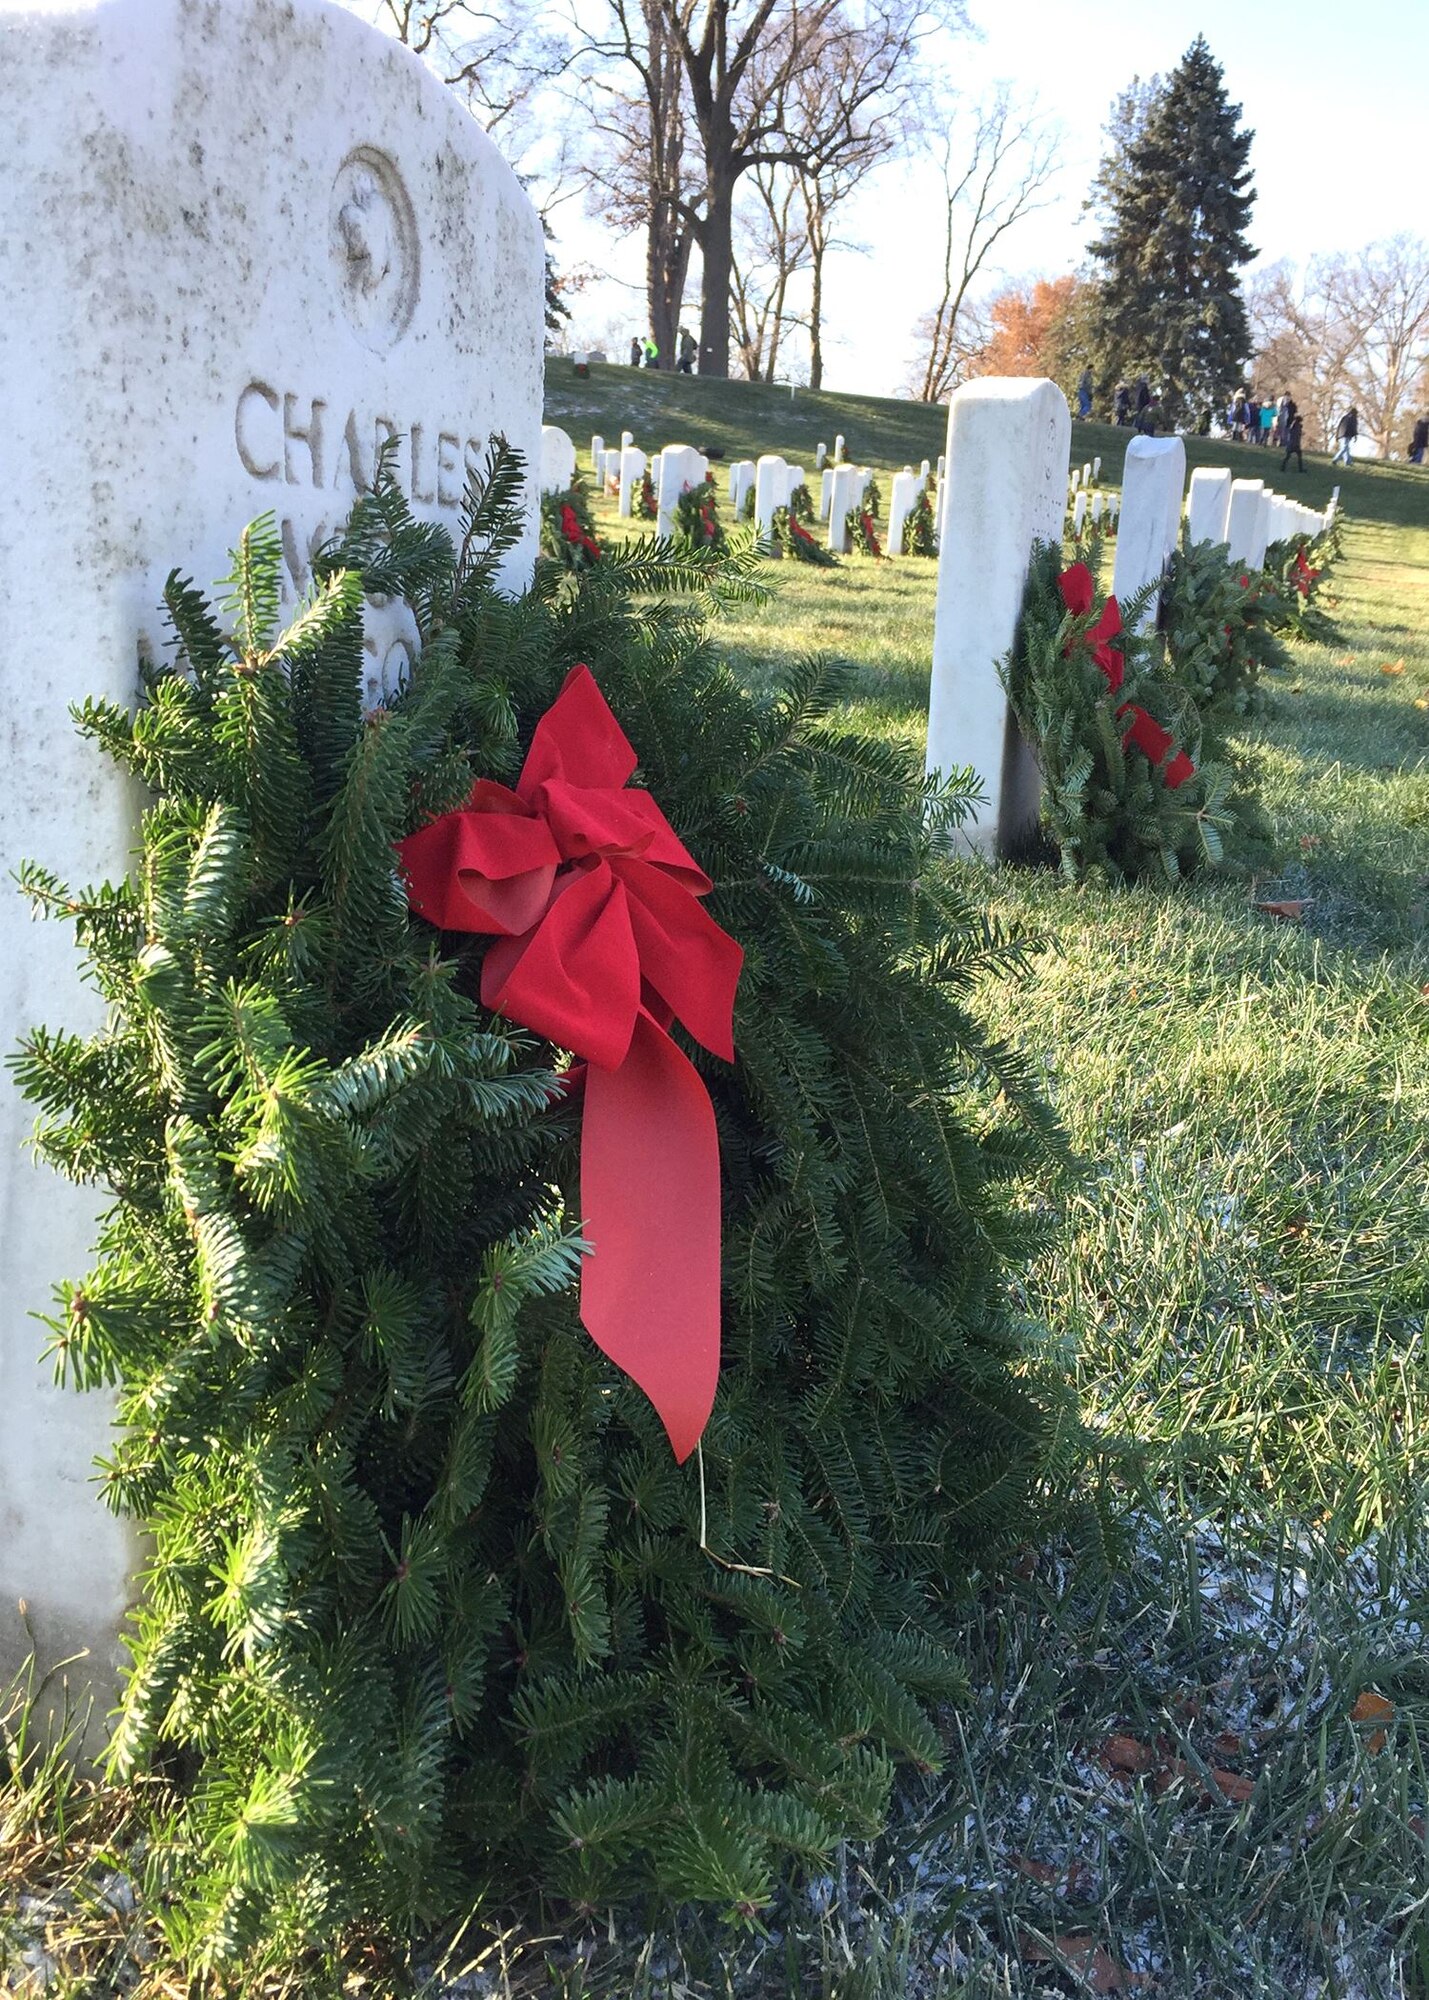 Remembrance wreaths adorn the gravesites of fallen service members Dec. 16, 2017, at Arlington National Cemetery in Arlington, Va. Tens of thousands of volunteers placed the wreaths during National Wreaths Across America Day. (U.S. Air Force photo by 2nd Lt. Natasha O. Mosquera)